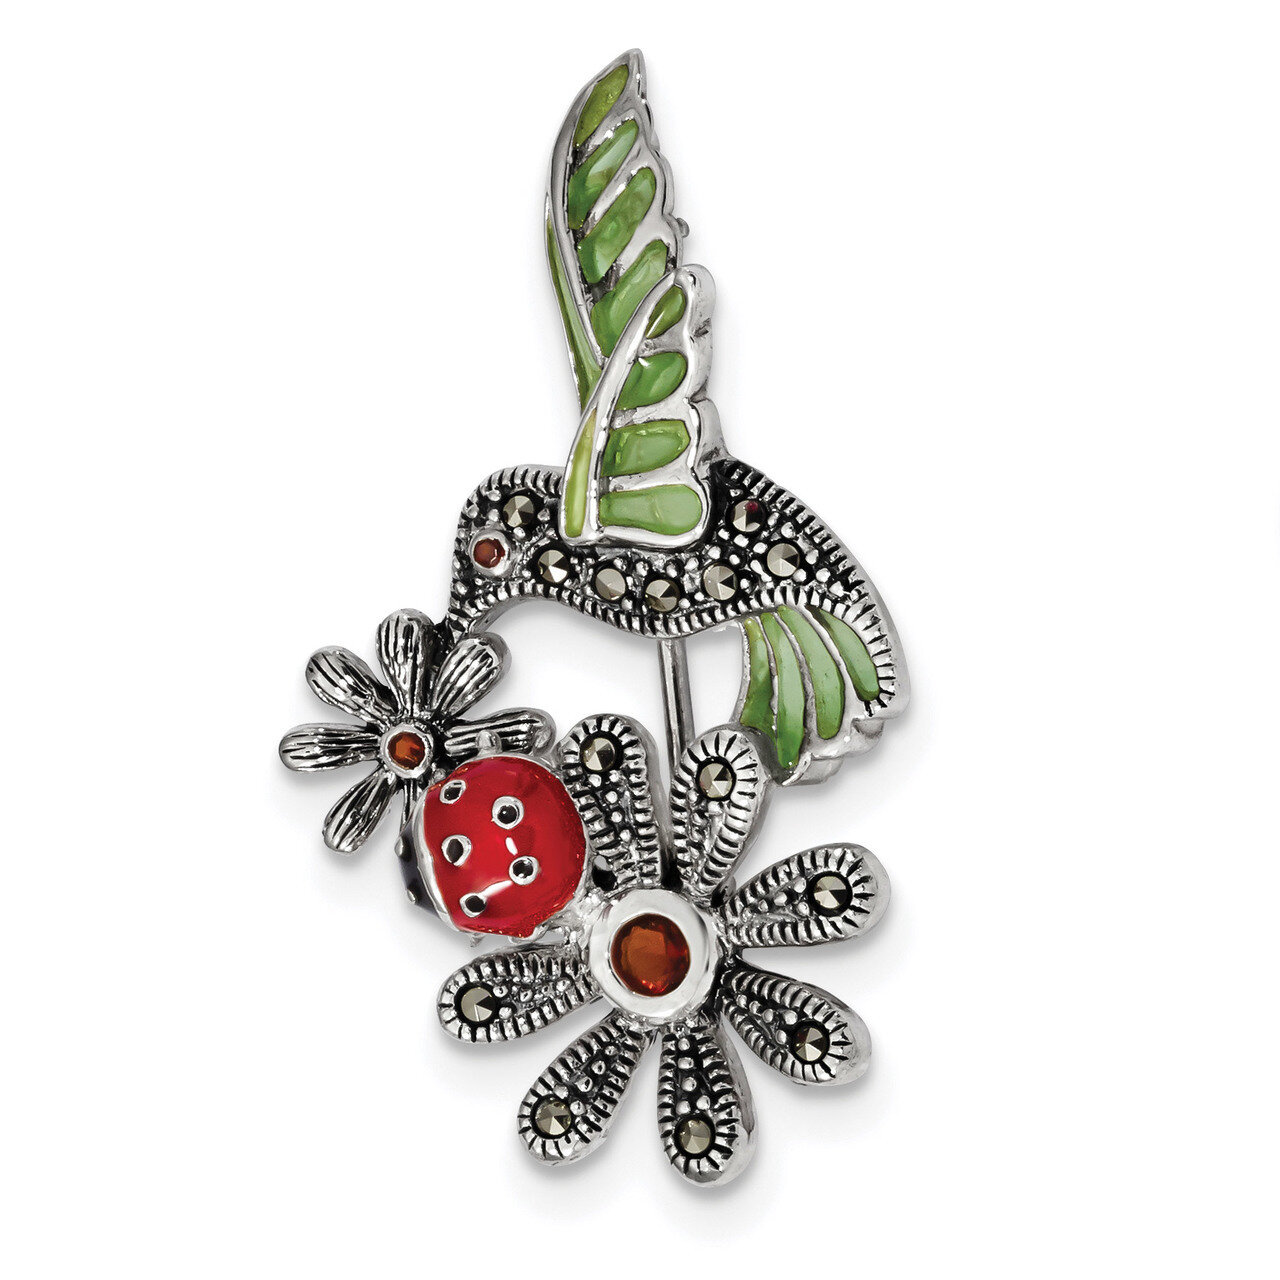 Epoxy/Marcasite/Red Glass Ladybug Flower Pin Sterling Silver Antiqued QP4887